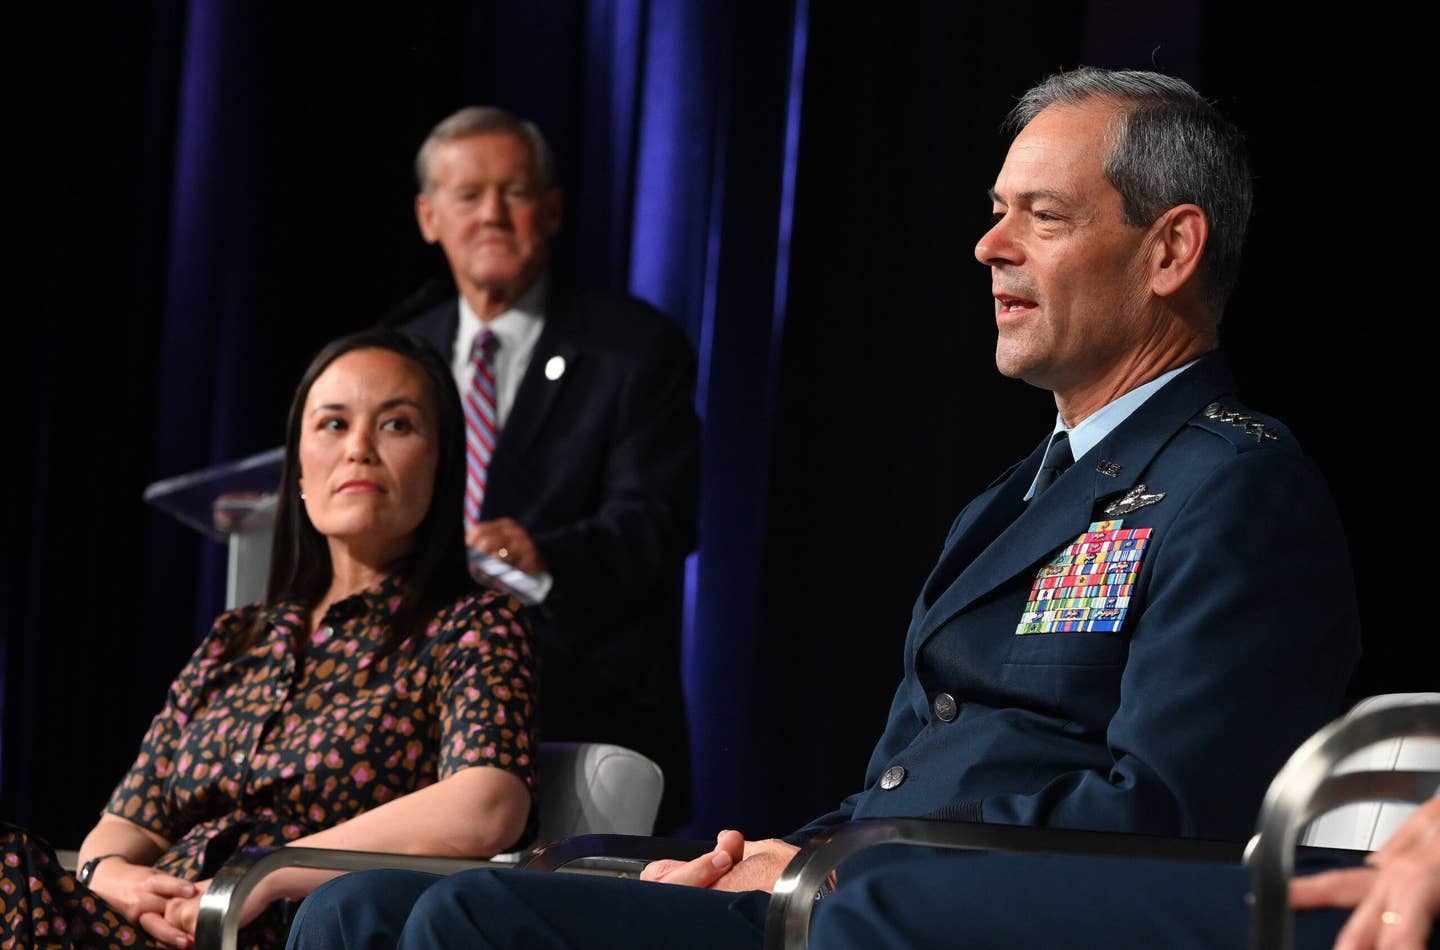 Under Secretary of the Air Force Gina Ortiz Jones and Gen. Ken Wilsbach, Pacific Air Forces commander, participate in a panel called “Preparing for Global Competition” during the 2022 Air and Space Forces Association’s Air, Space and Cyber Conference in National Harbor, Maryland, September 19, 2022.&nbsp;<em>U.S. Air Force photo by Tech. Sgt. Nick Wilson</em>